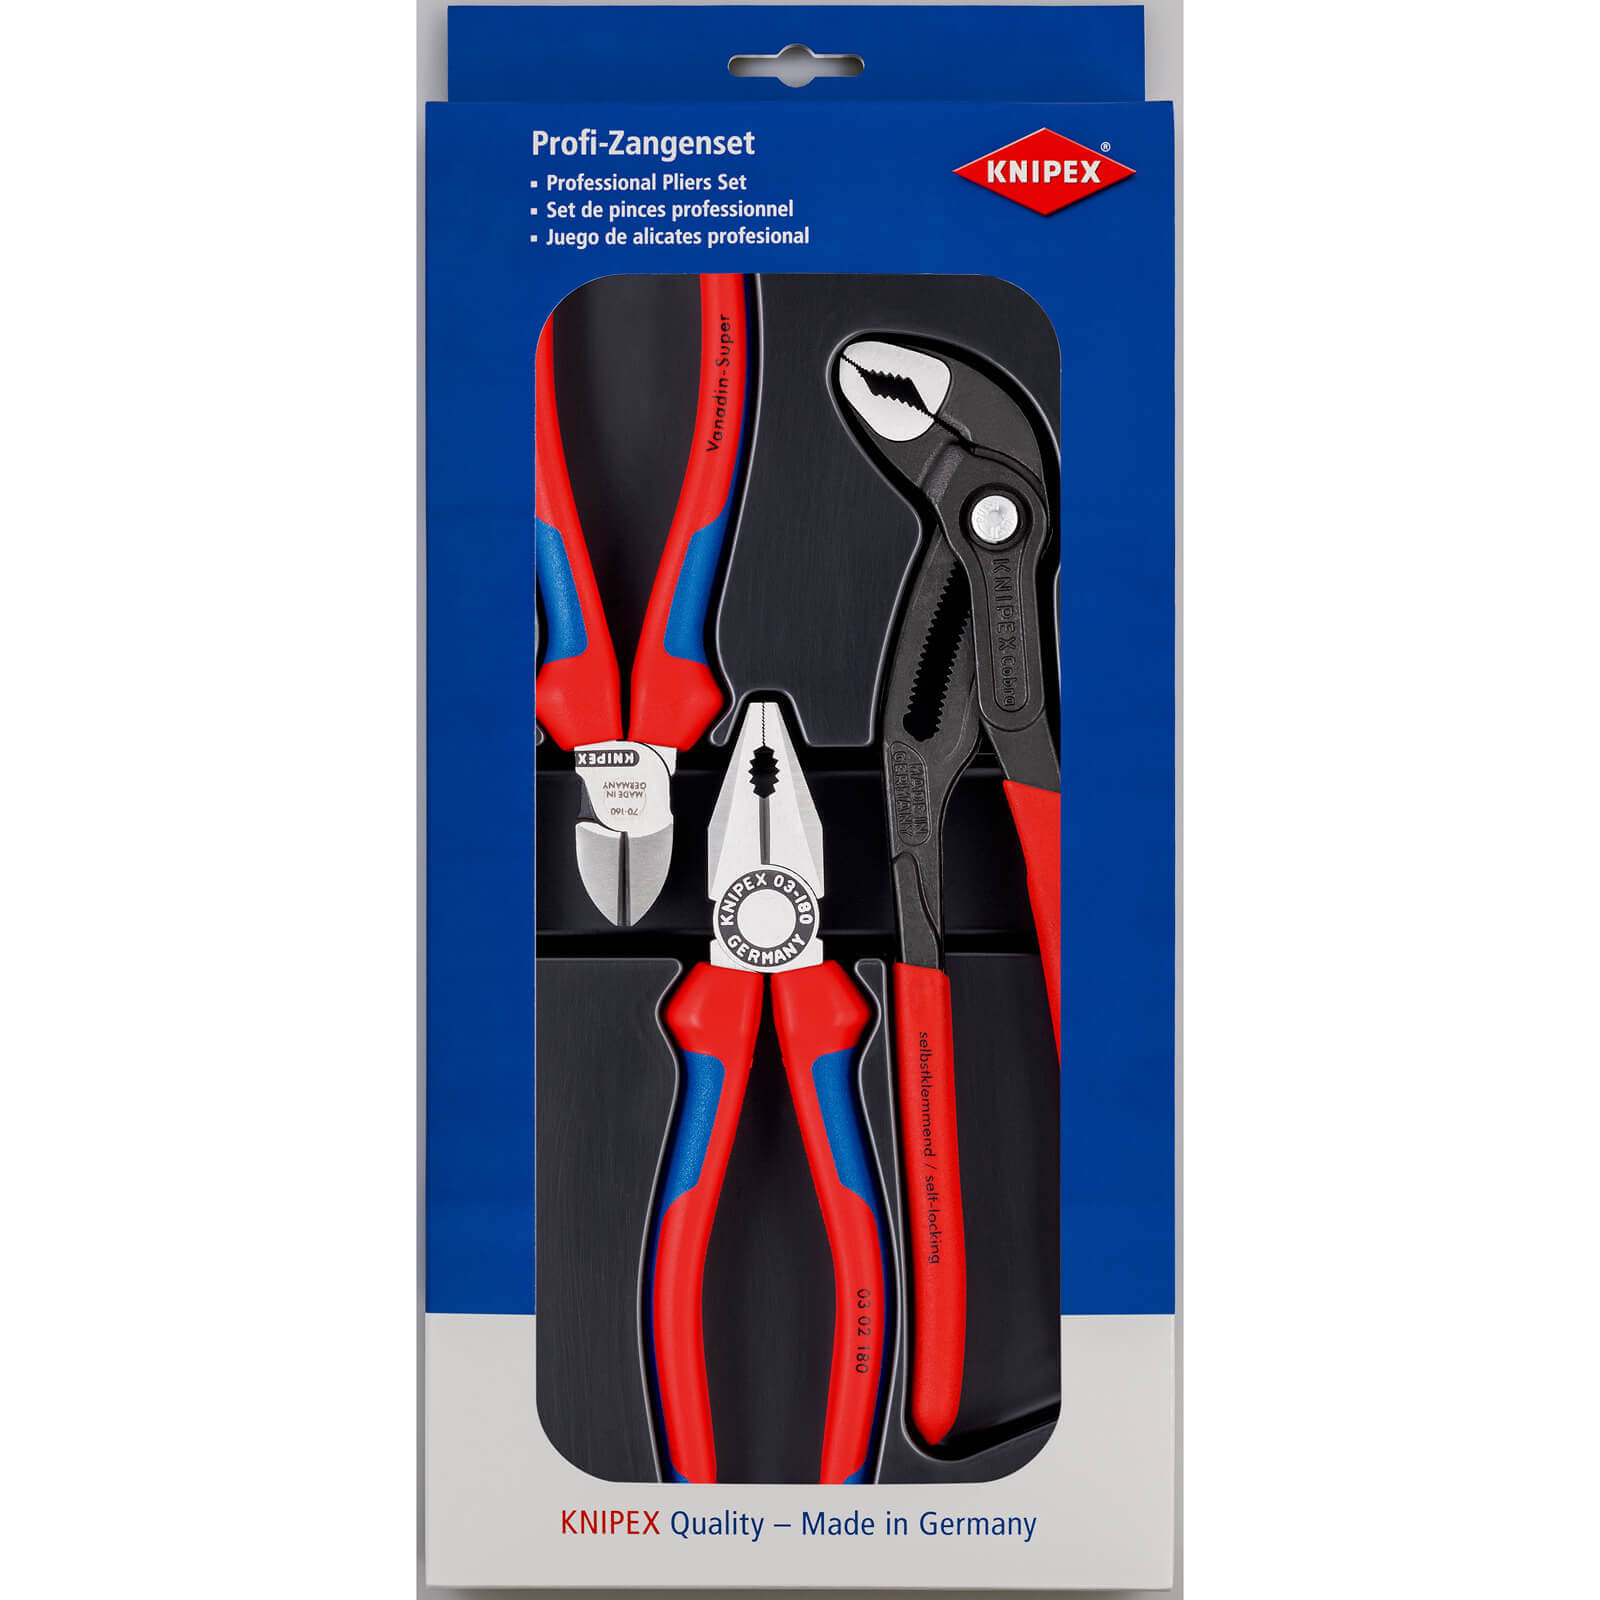 Knipex 3 Piece Professional Bestseller Pliers Set